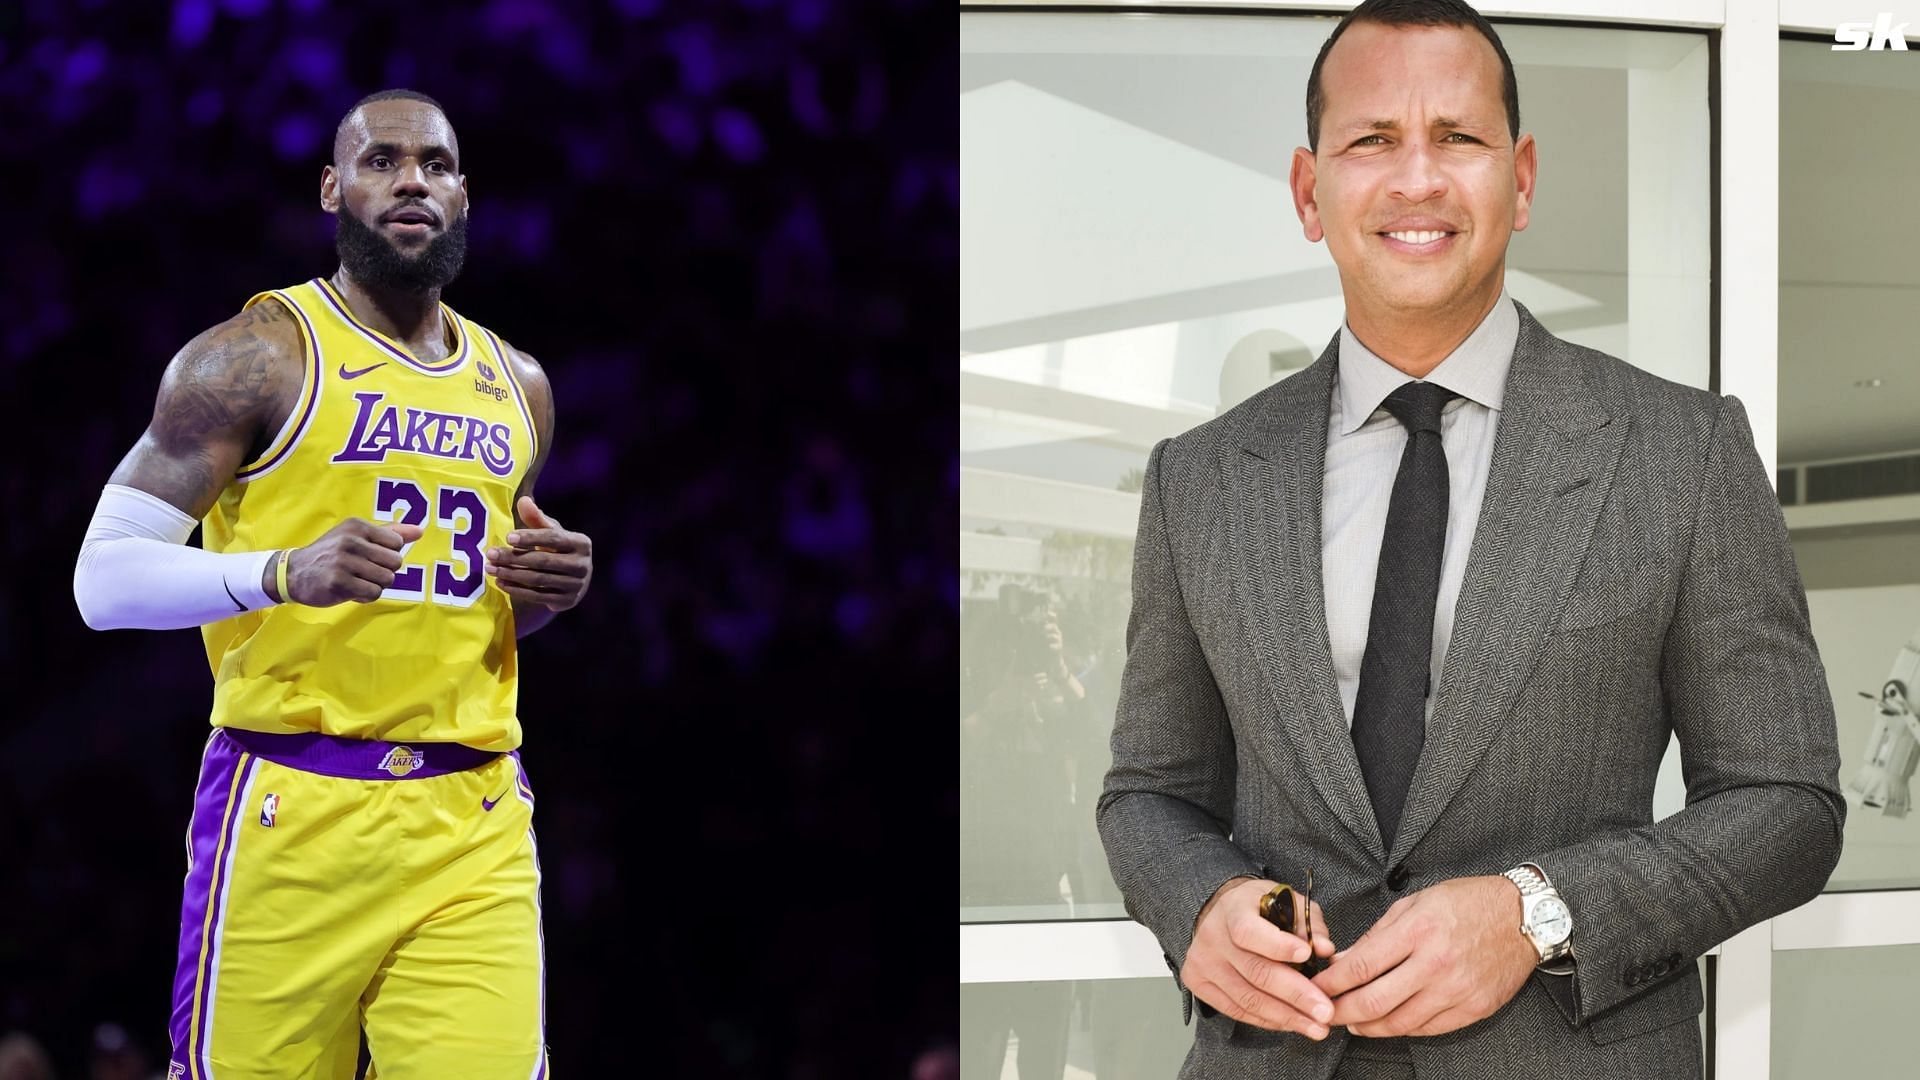 Alex Rodriguez wishes Lebron James on his birthday post Lakers matchup against the Timberwolves